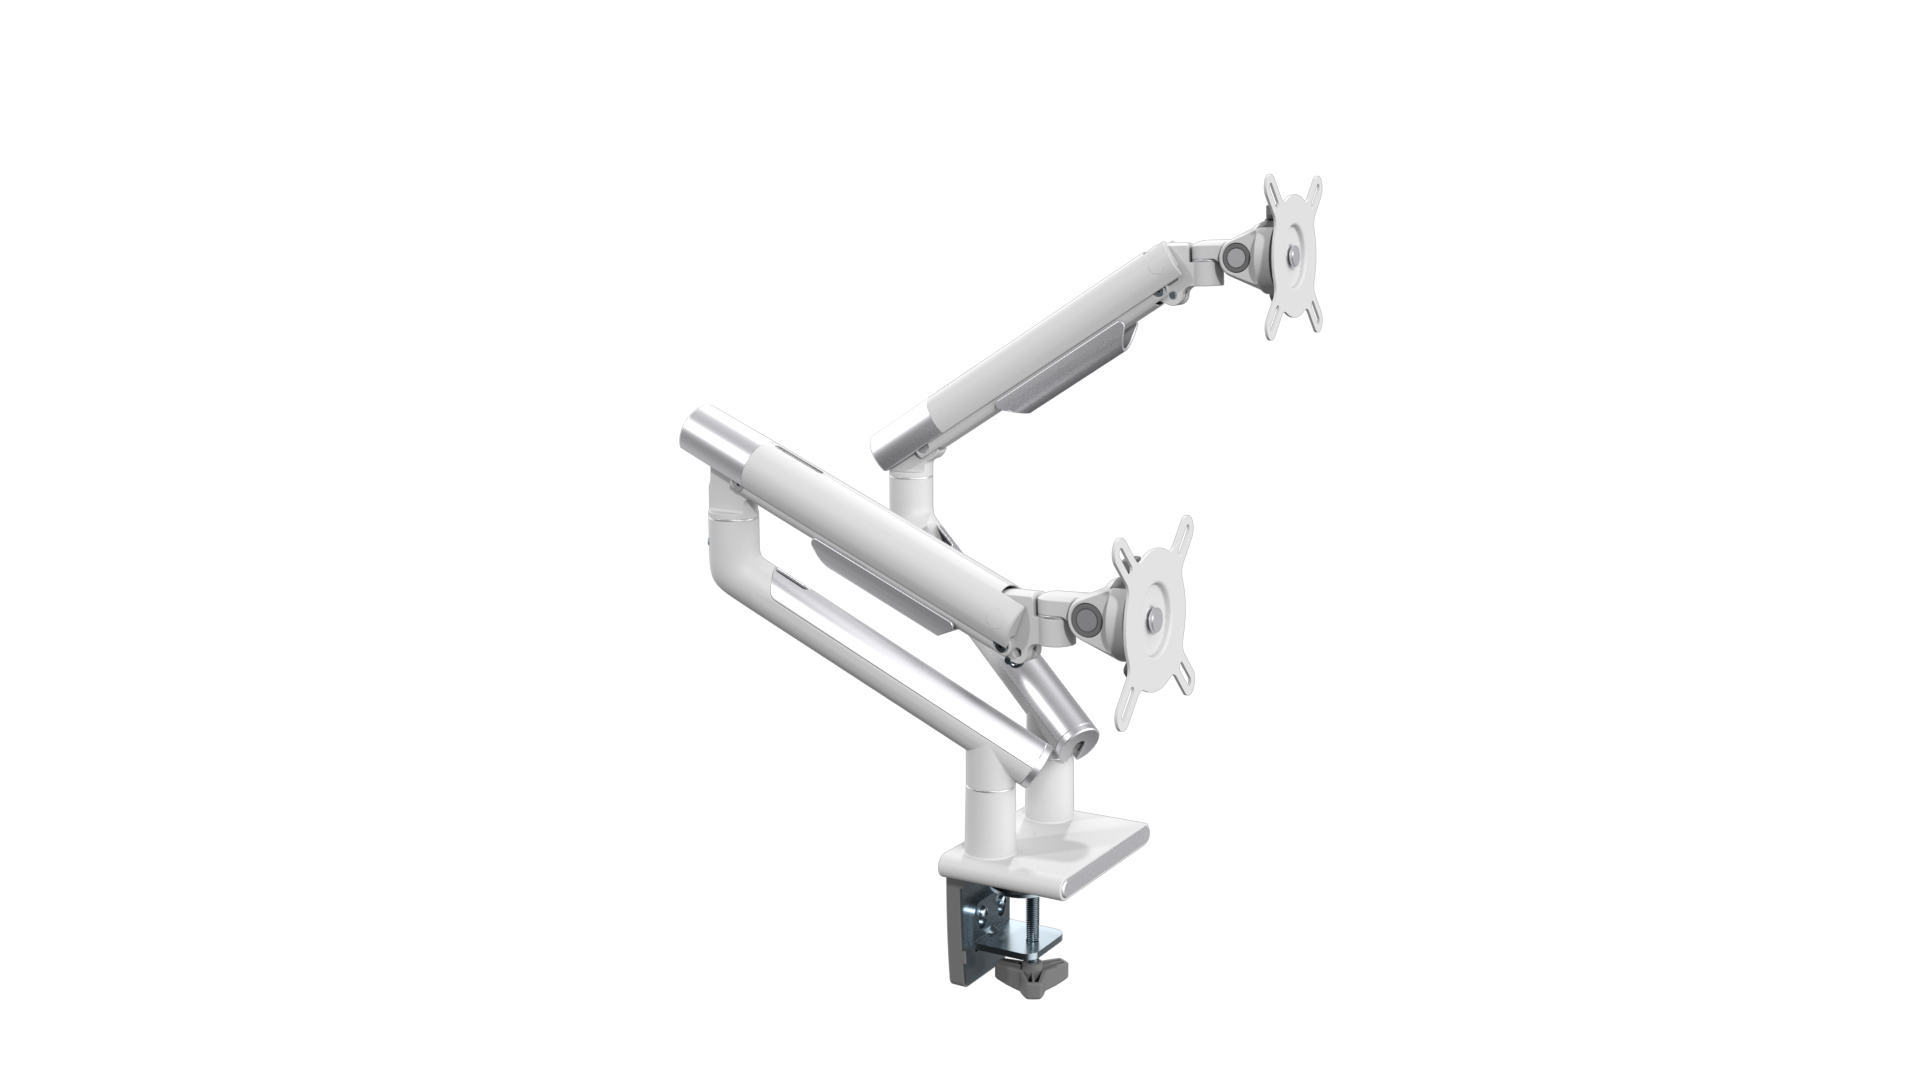 Dual Monitors Premium Slim Aluminum Spring-Assisted Monitor Arms Supplier  and Manufacturer- LUMI